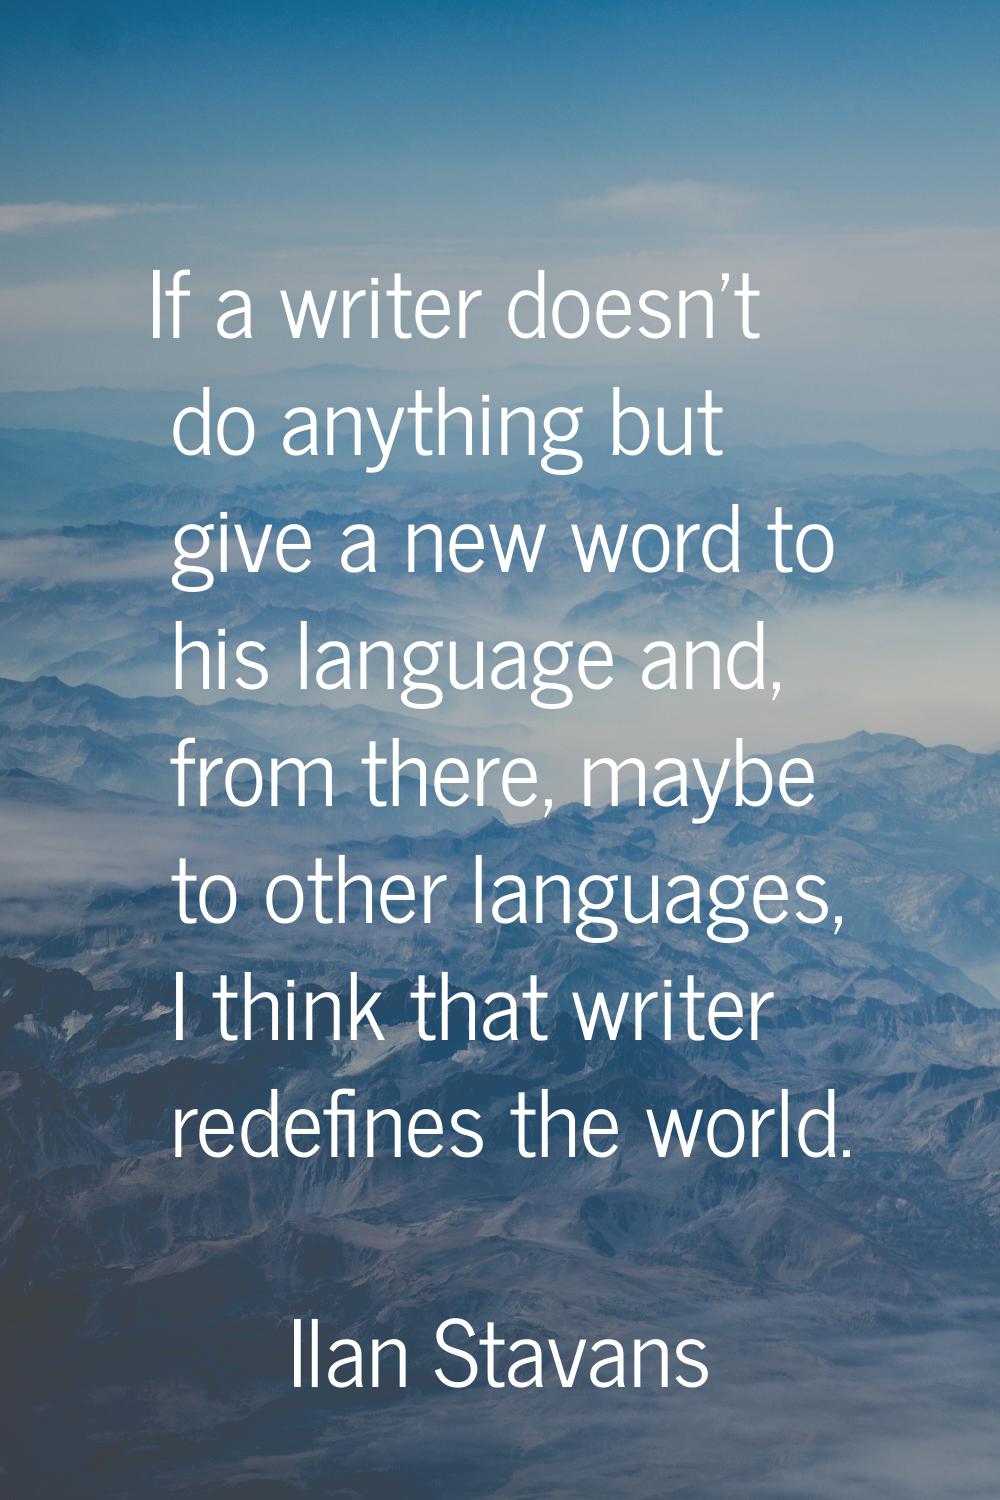 If a writer doesn't do anything but give a new word to his language and, from there, maybe to other